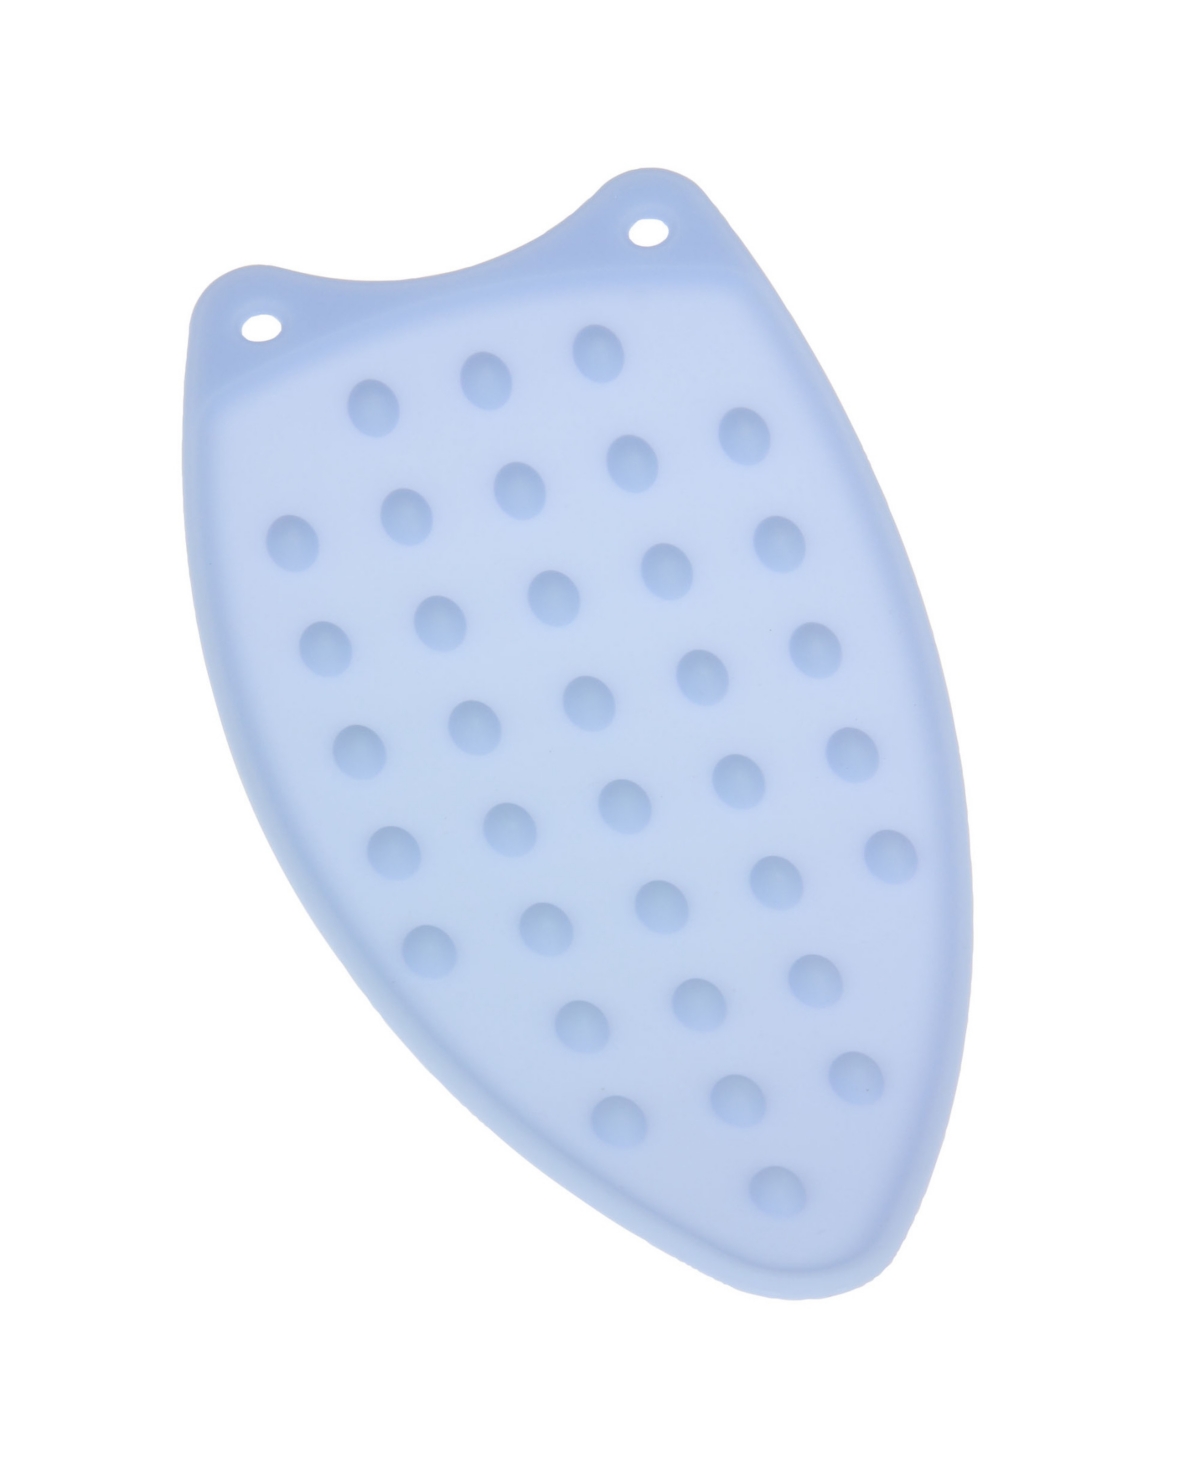 Household Essentials Silicone Iron Rest Pad In Blue